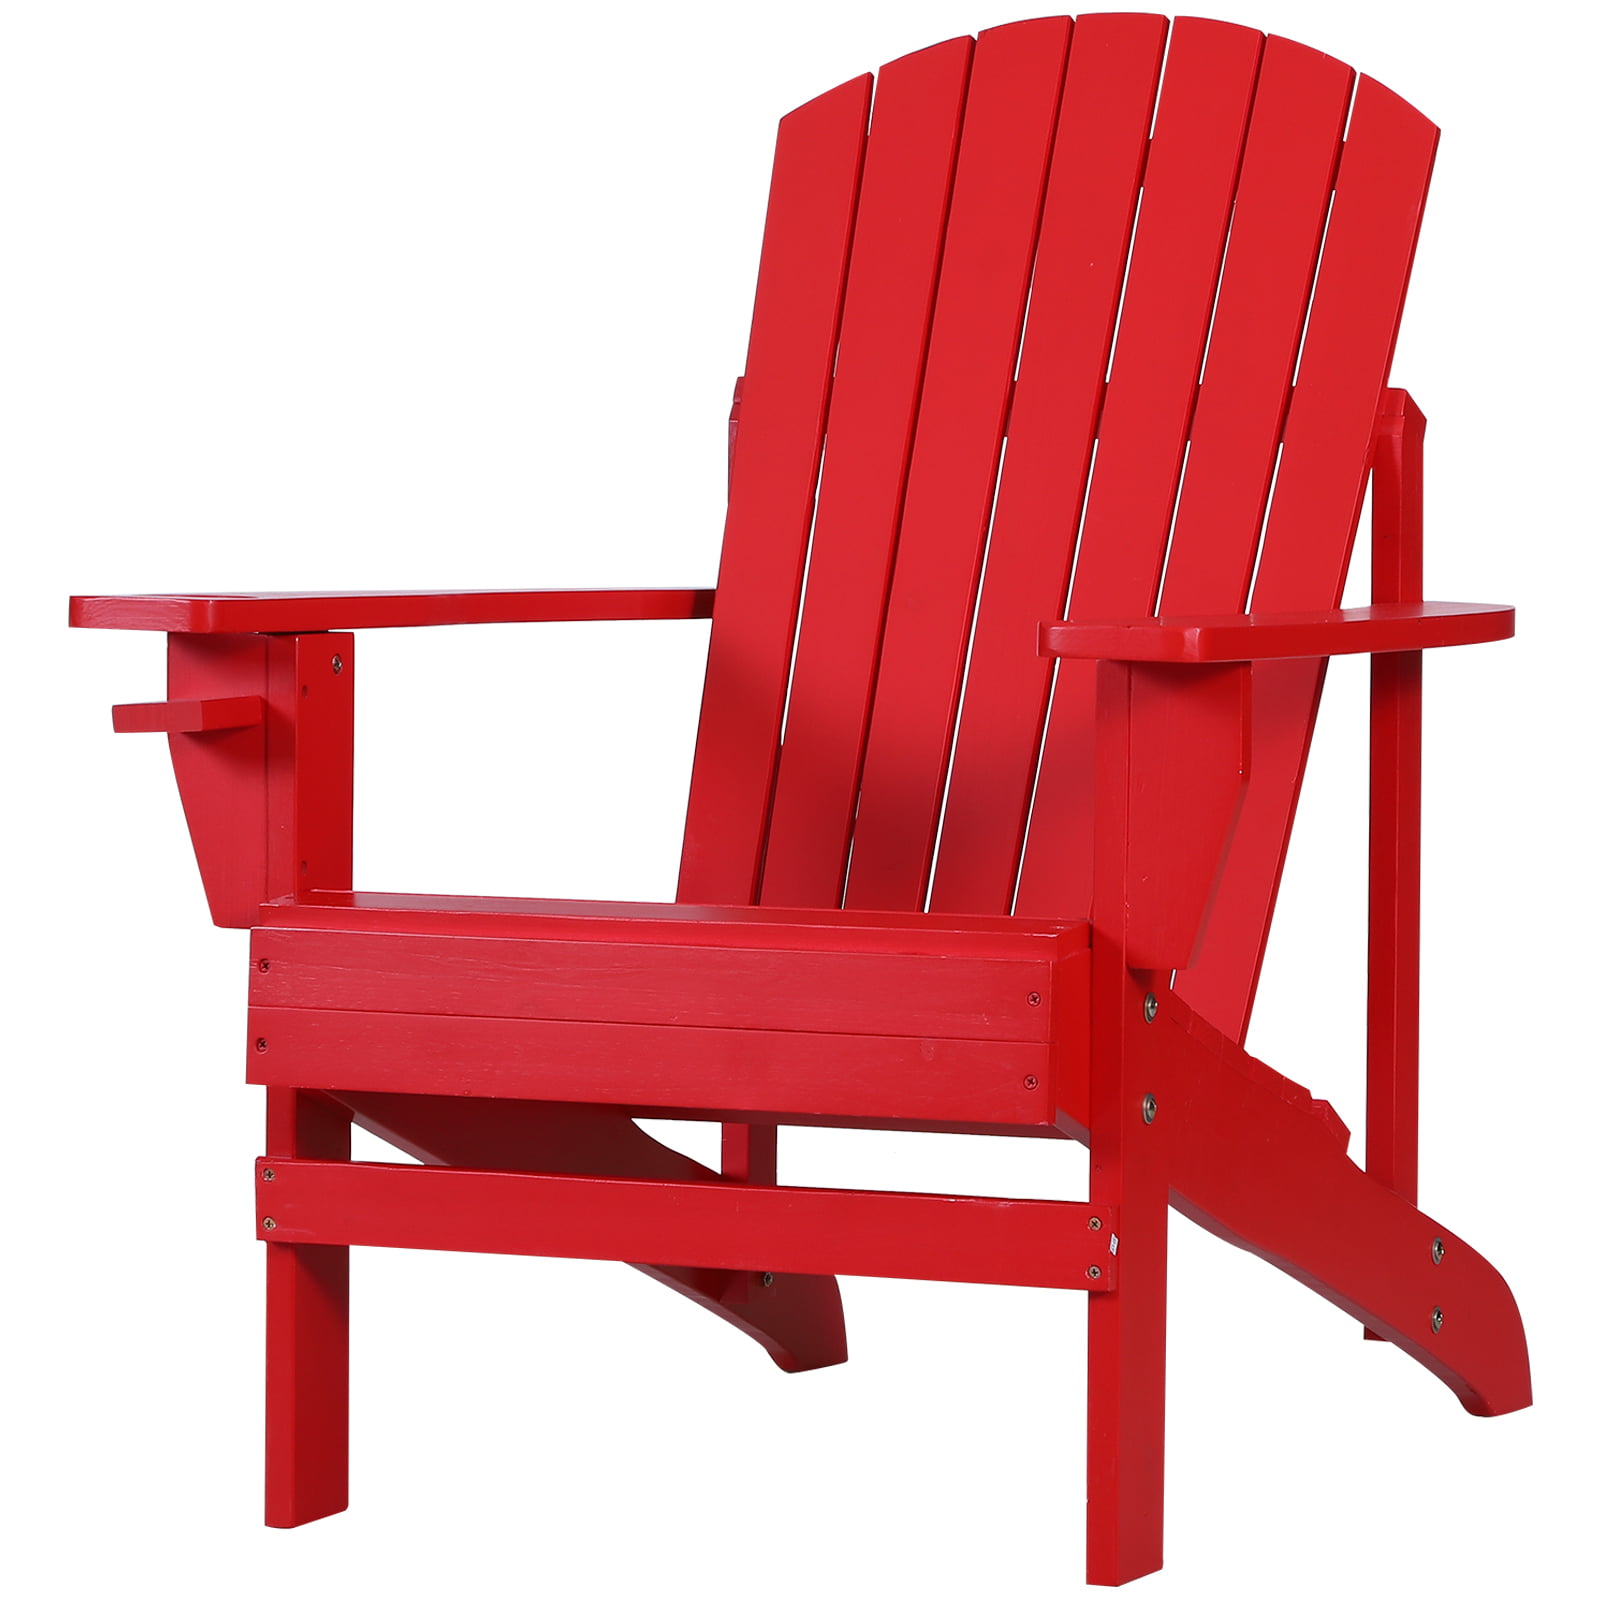 Wood Adirondack Chair Outdoor Patio Chaise Lounge Deck Reclined Bench Porch